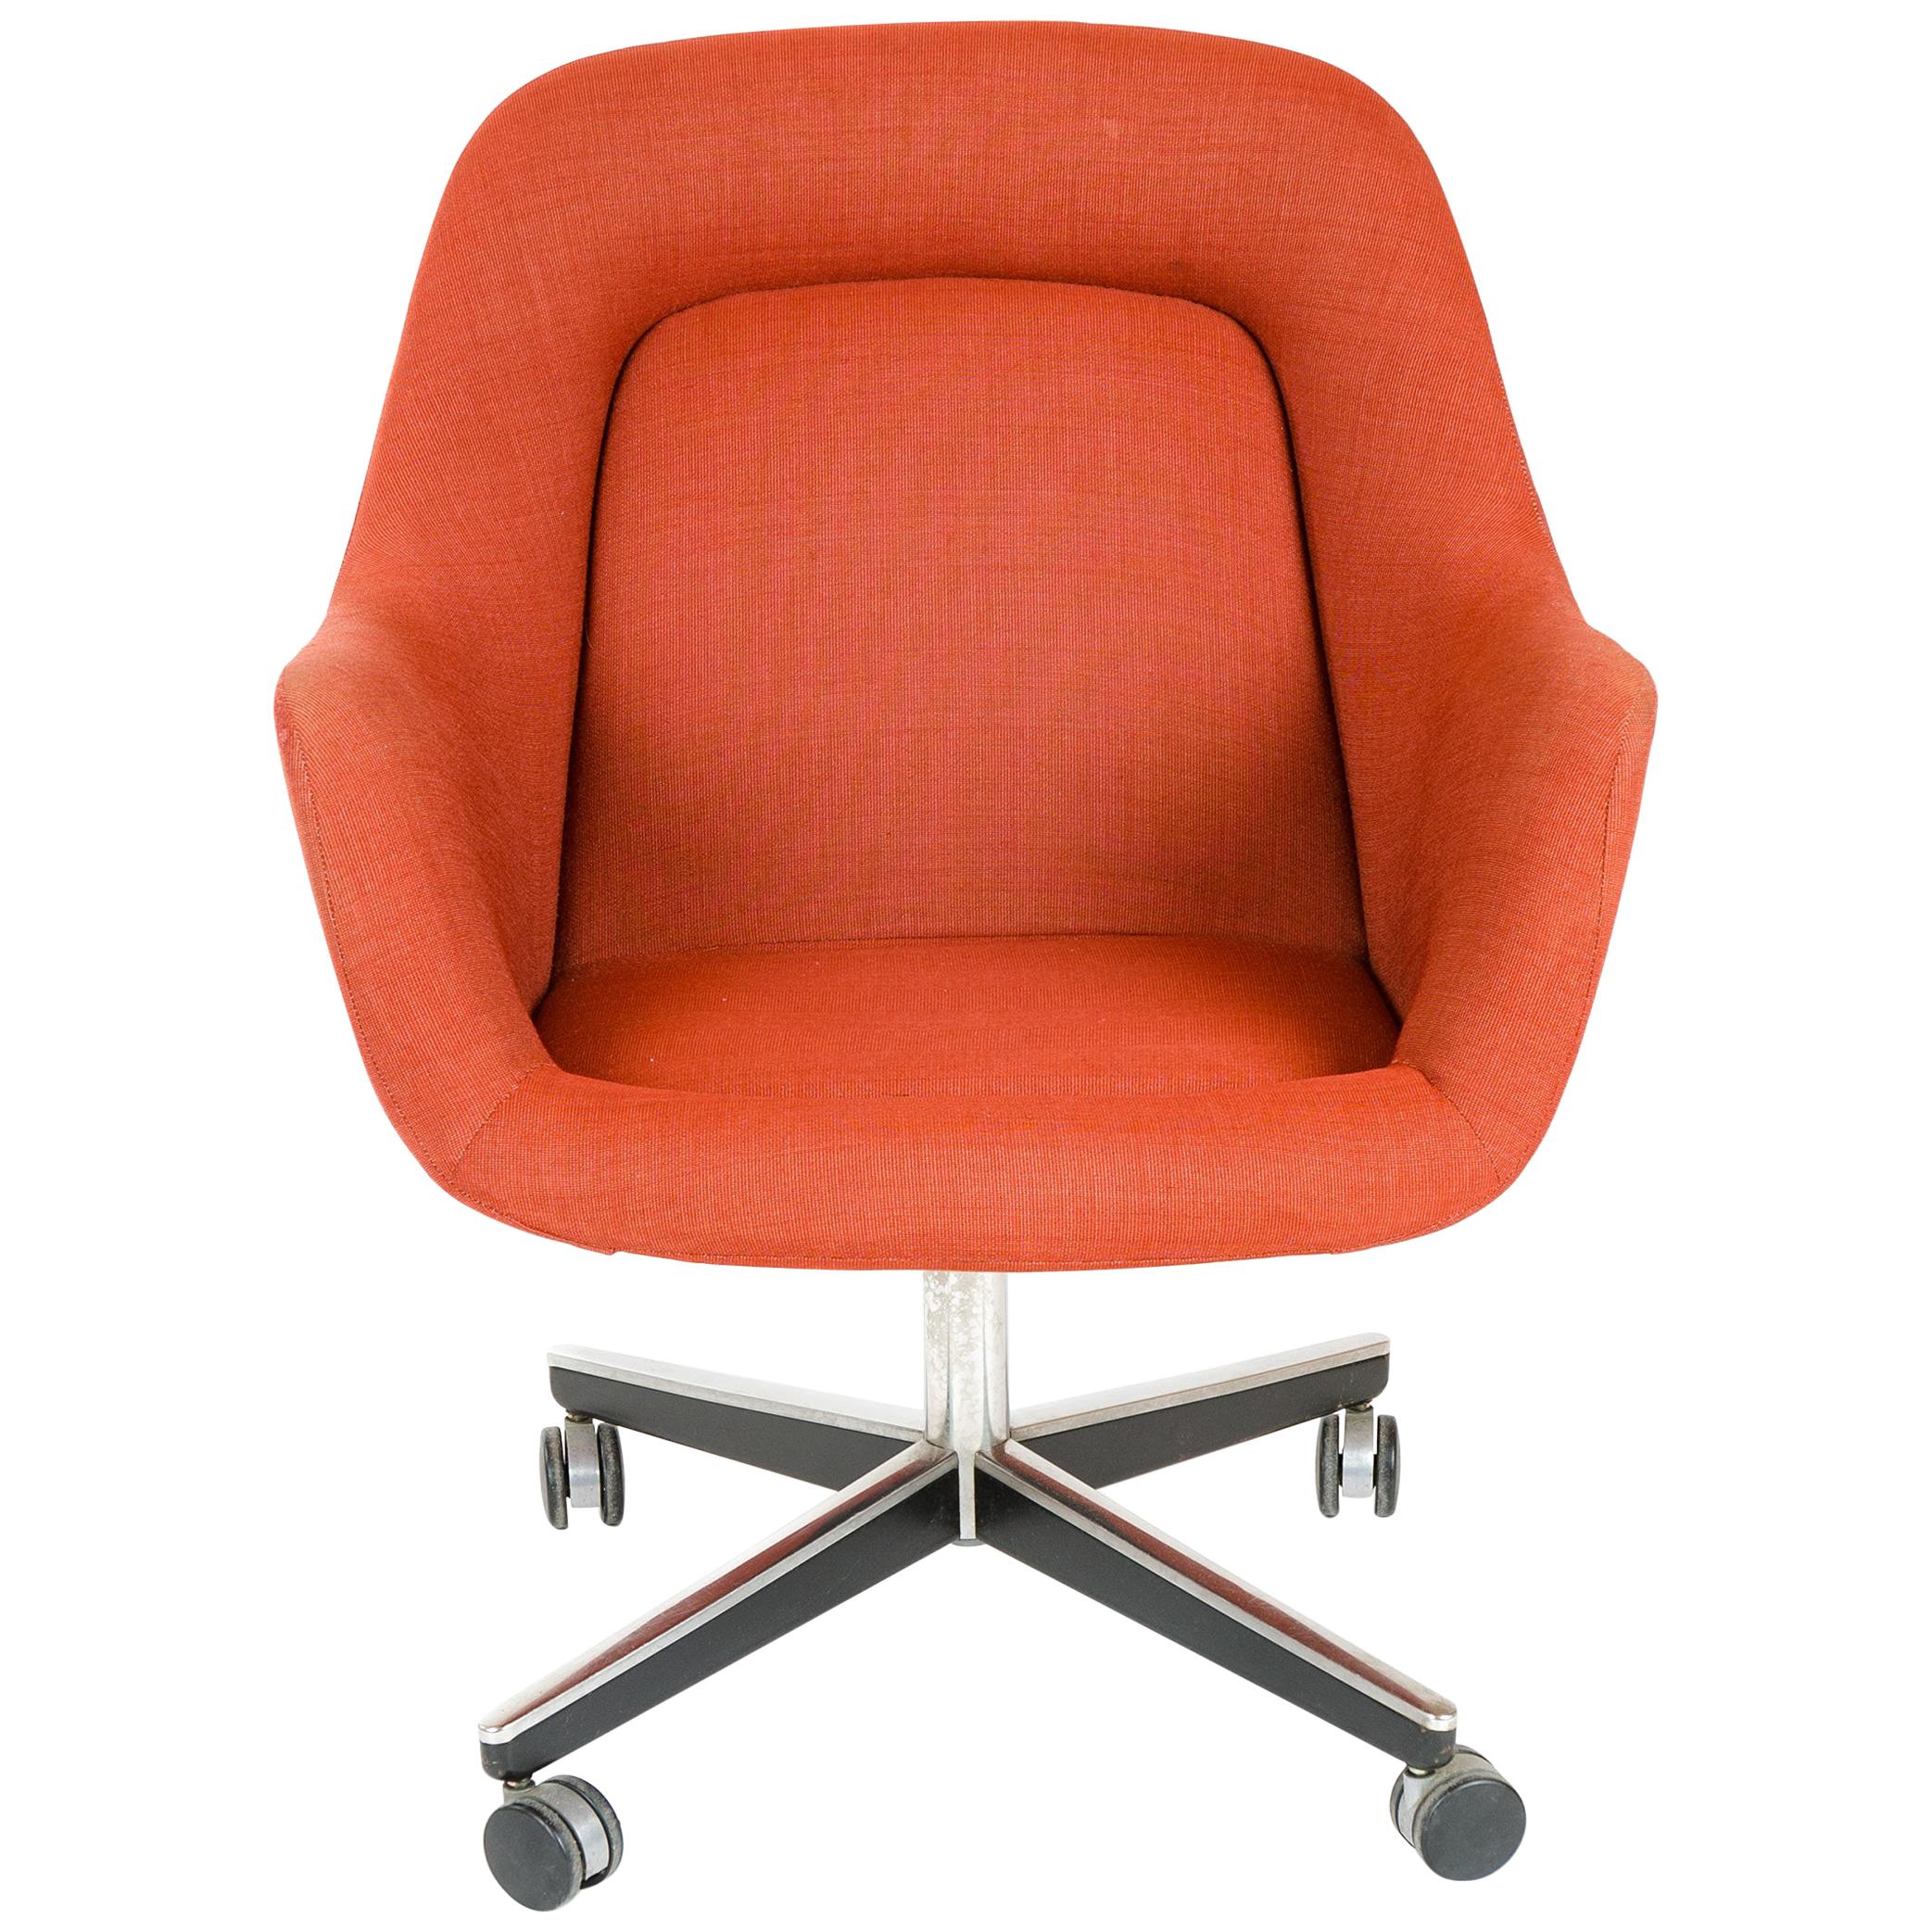 1970s Swivel Desk Chair by Max Pearson for Knoll